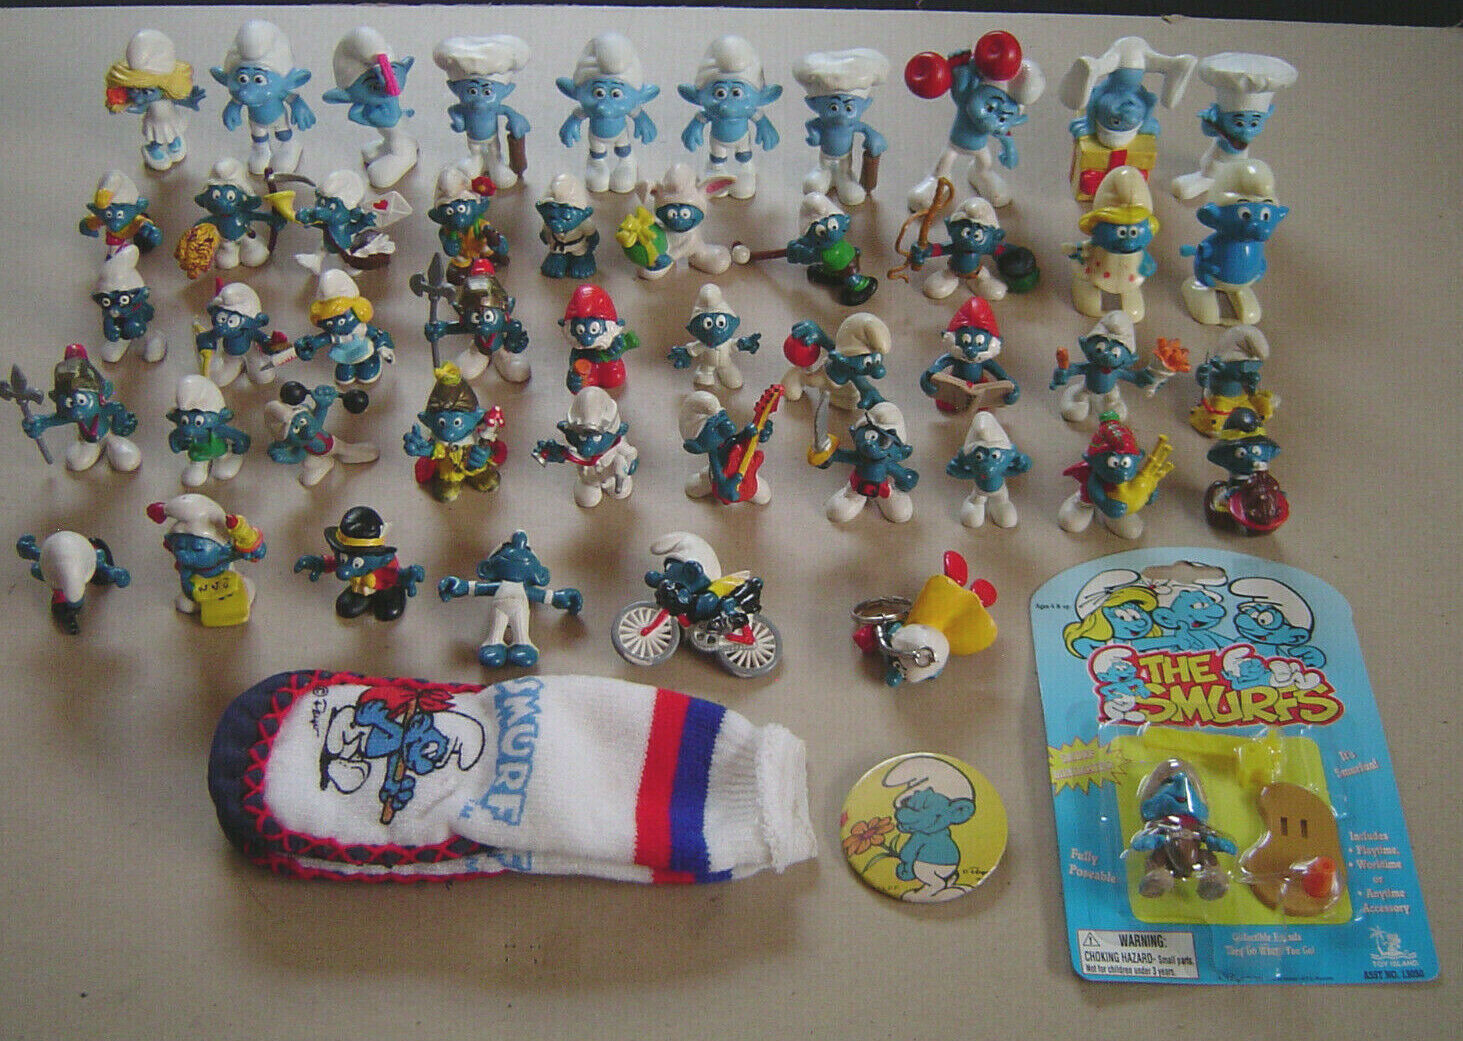 Vintage Smurf Lot 38 Old 15 New 1 Key Chain 2 Wind-Up 1 Pair of Socks Button